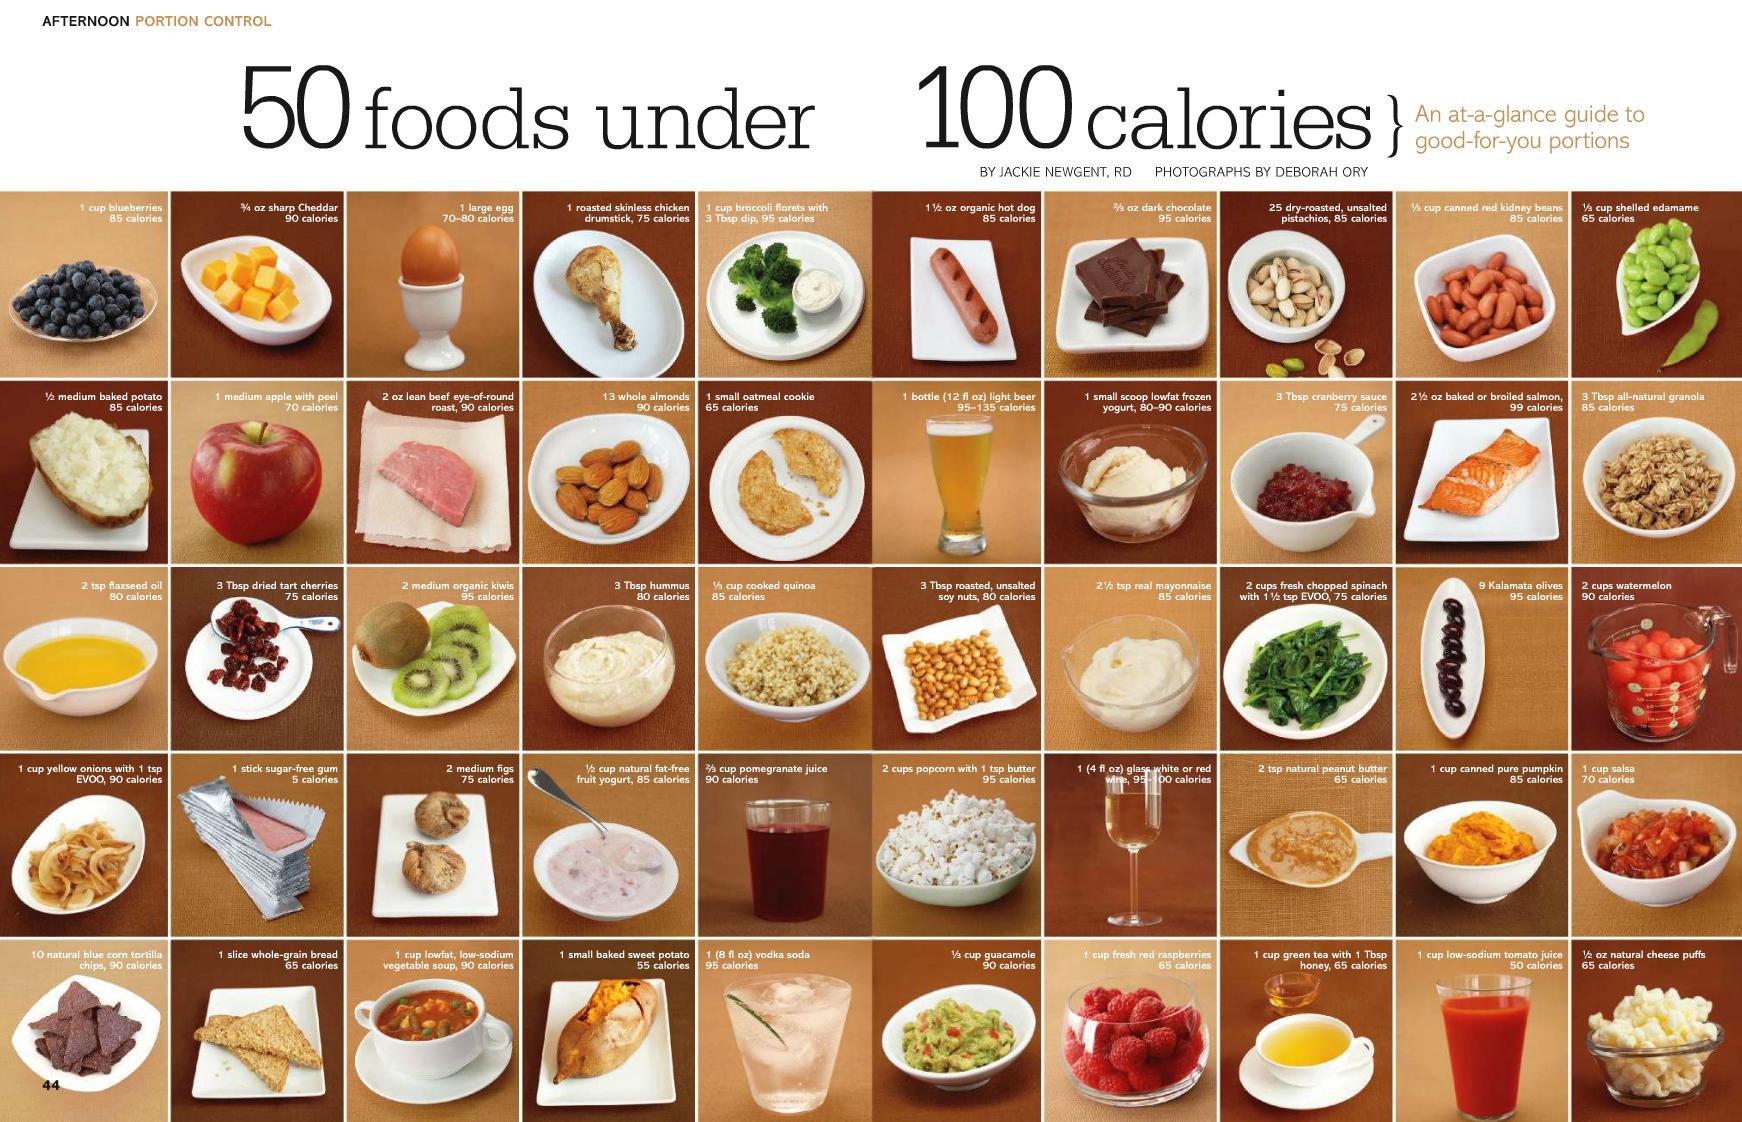 Great Healthy Snacks
 Top 10 Healthy Snacks under 100 Calories for Weight Loss